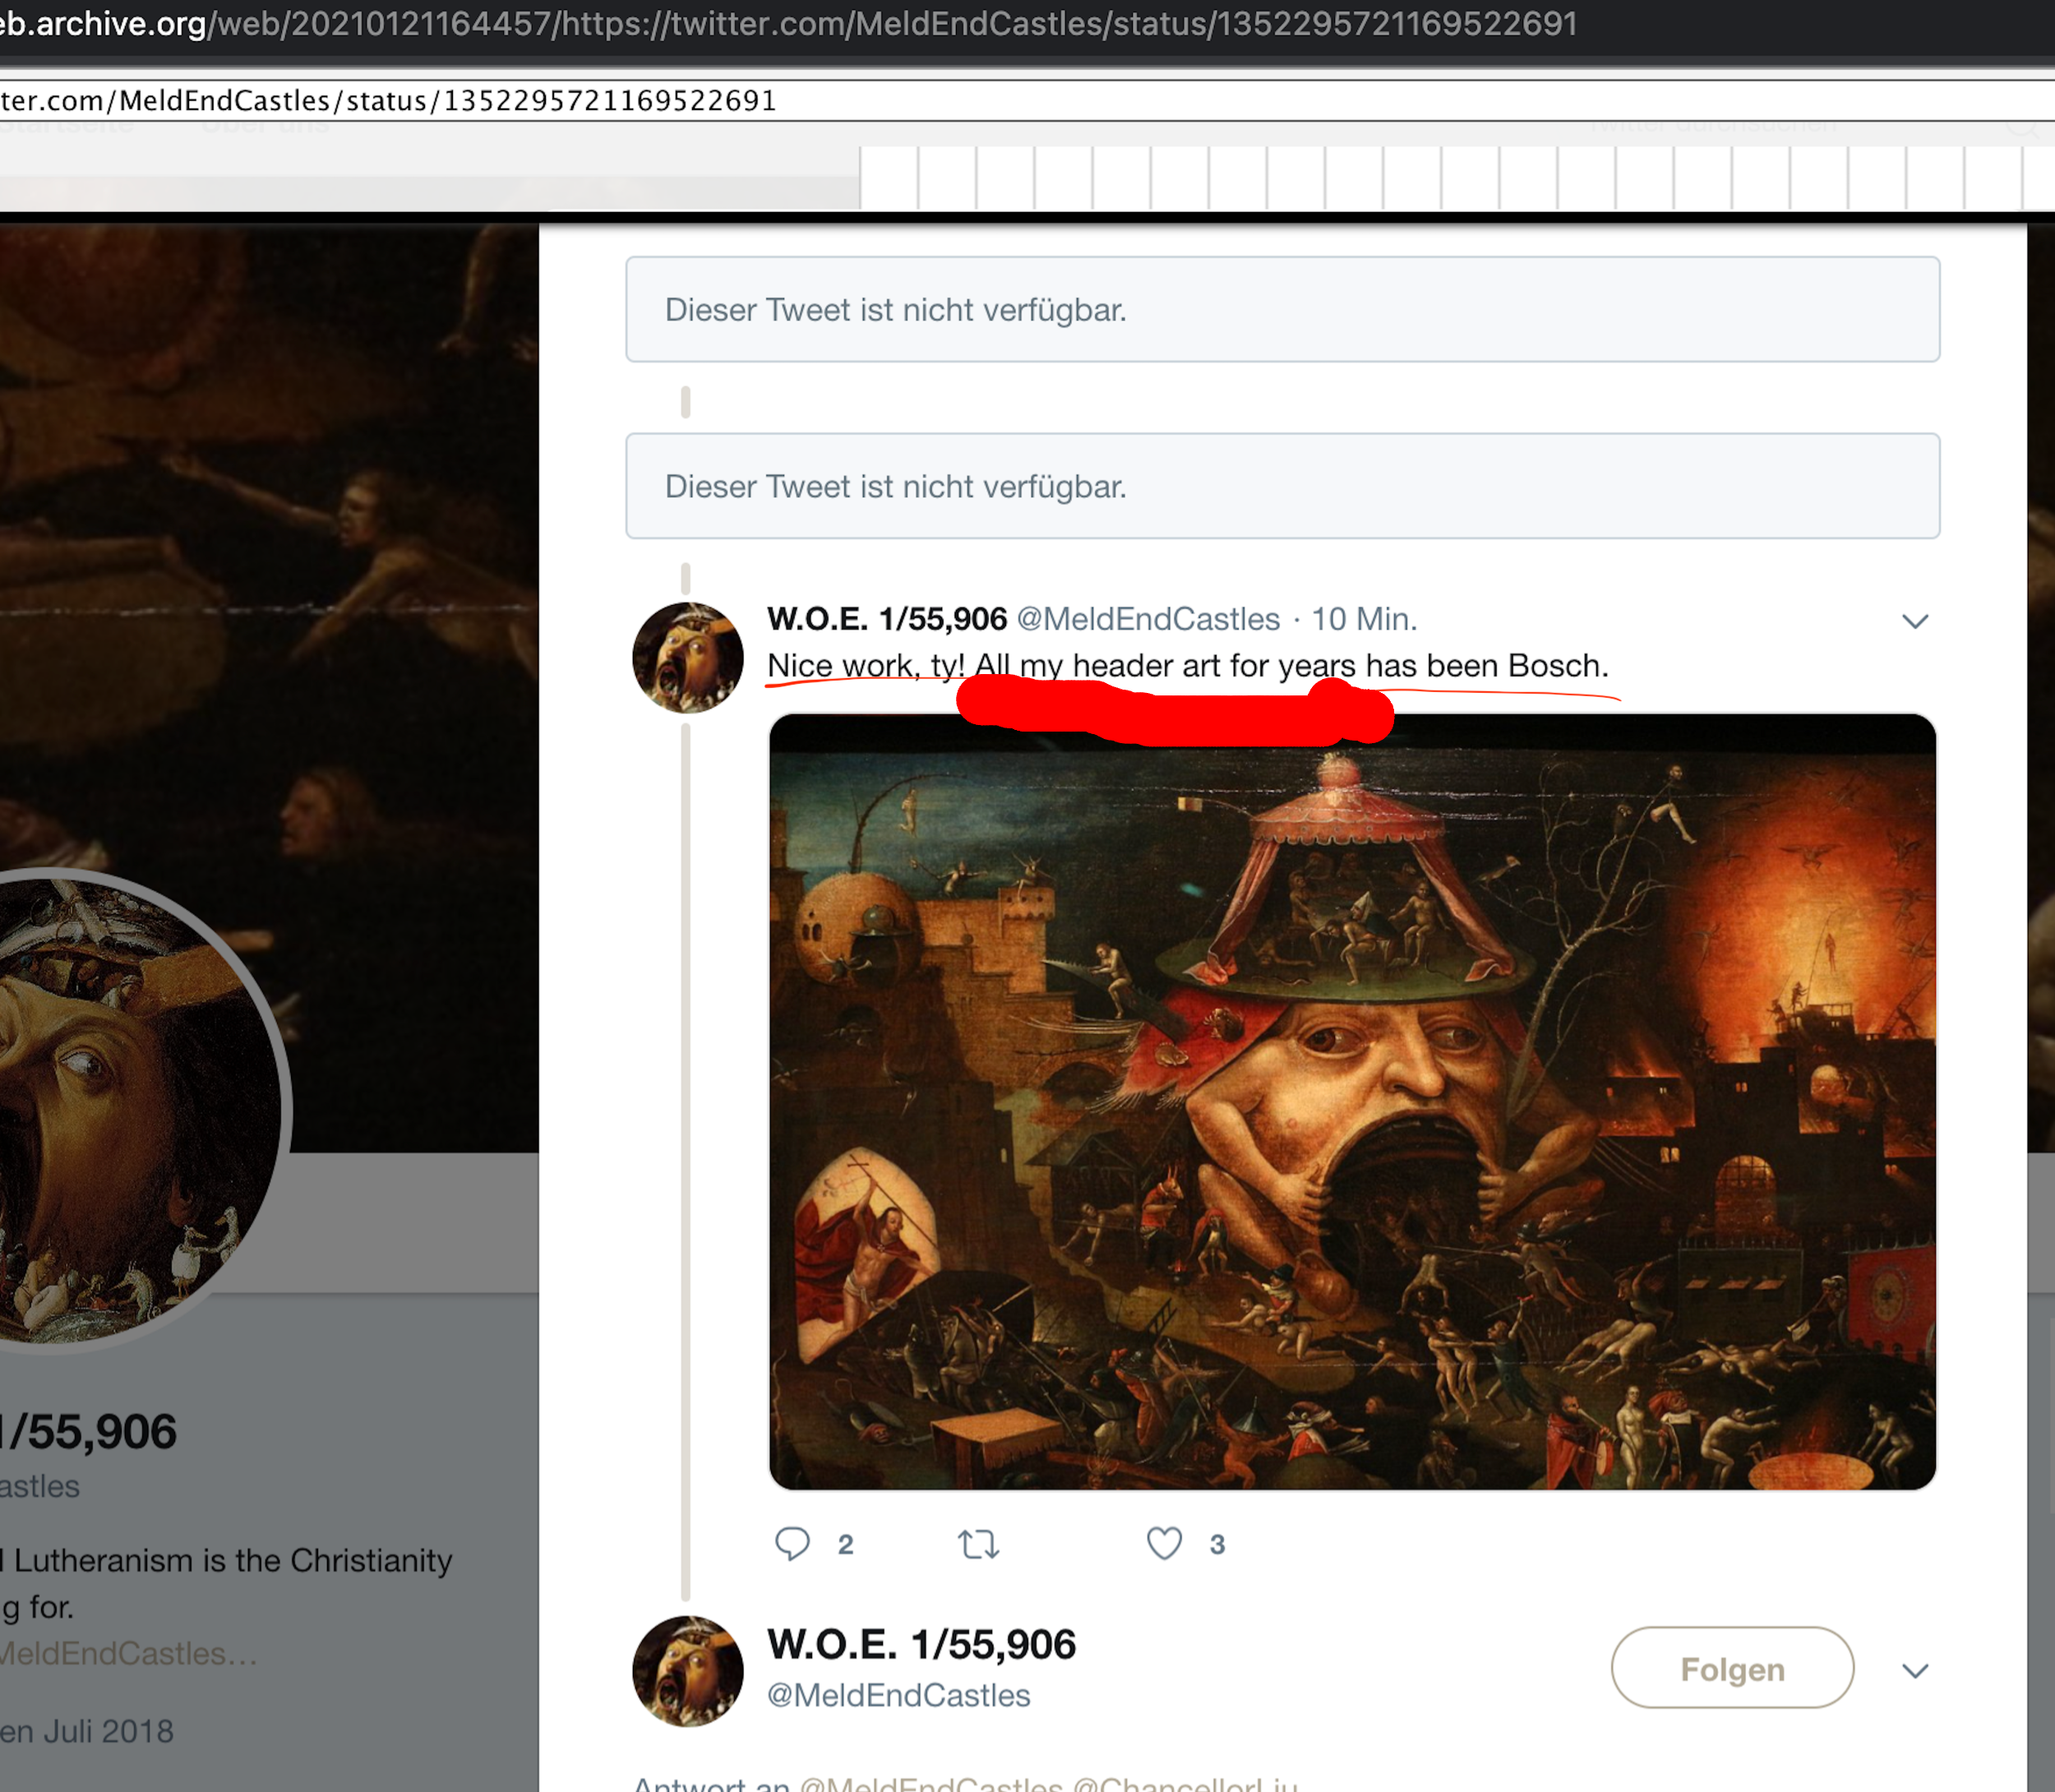 Woe saying that "all my header art for years has been Bosch." Below is an image of Christ in Limbo, painting by Bosch follower. Same painting is used in the HermannBillung and est1608 images.